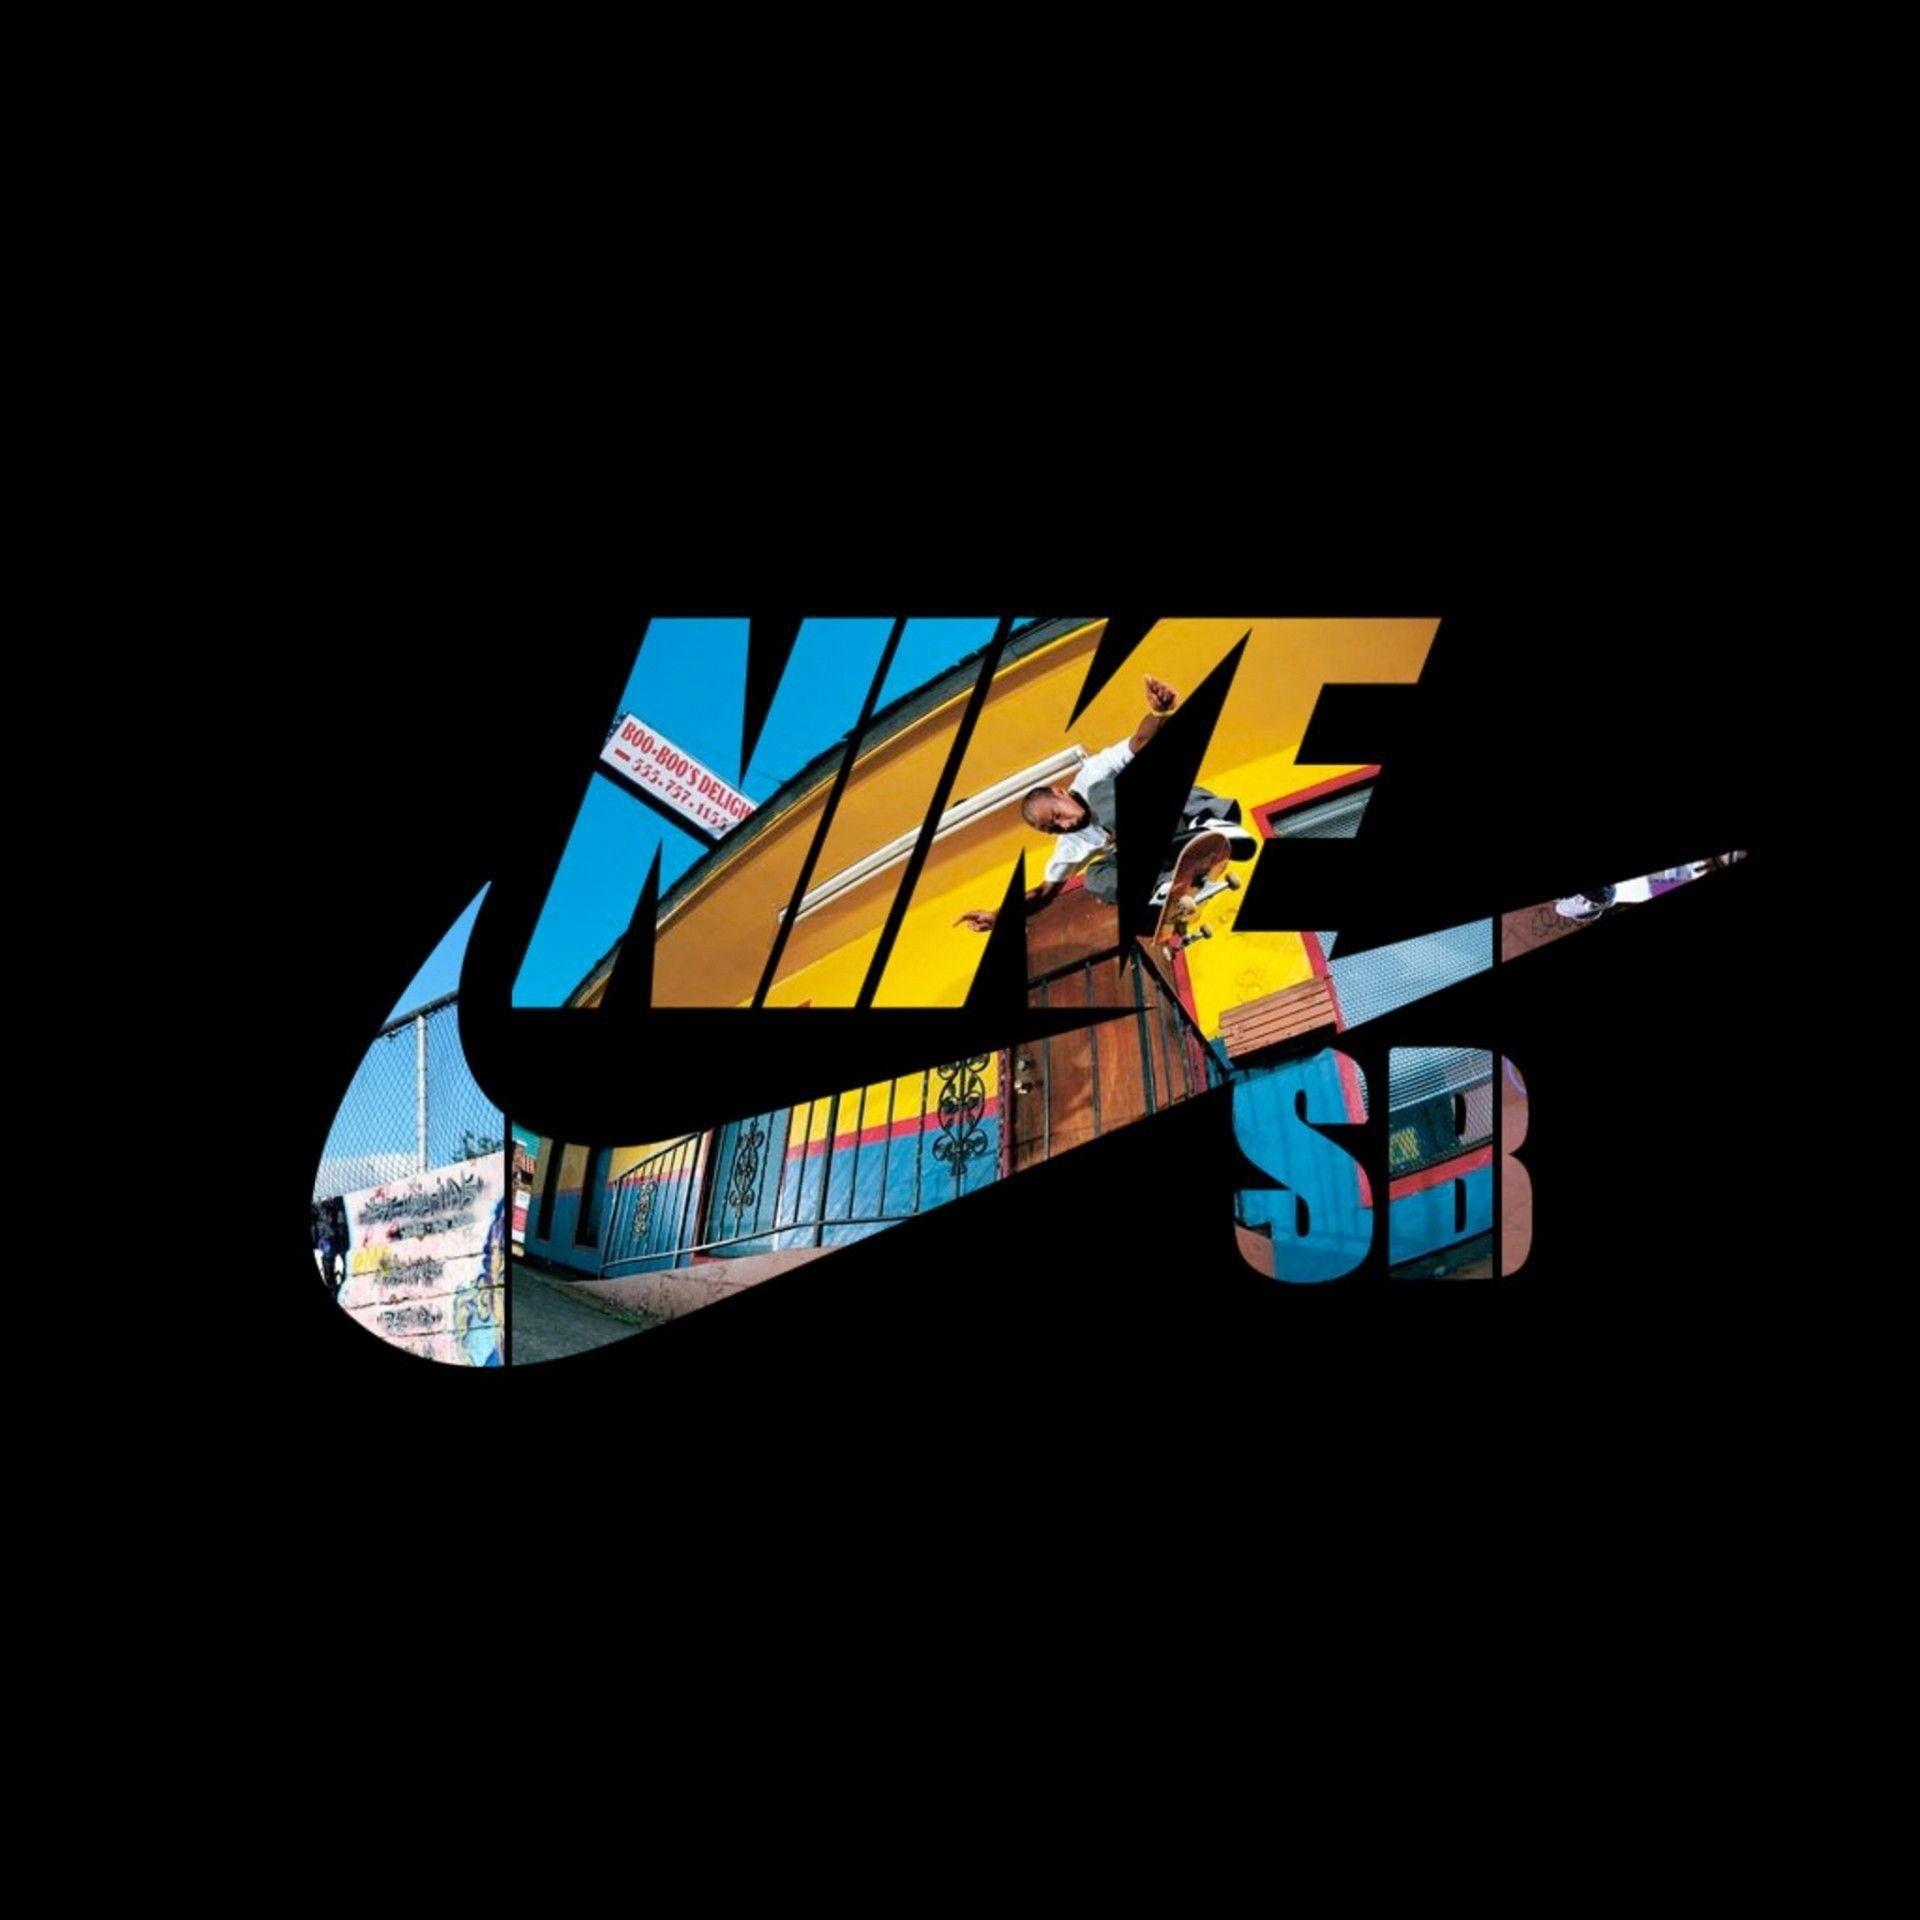 Pin by Hooter's Konceptz on Nike wallpaper | Nike wallpaper, Cool nike  wallpapers, Nike logo wallpapers